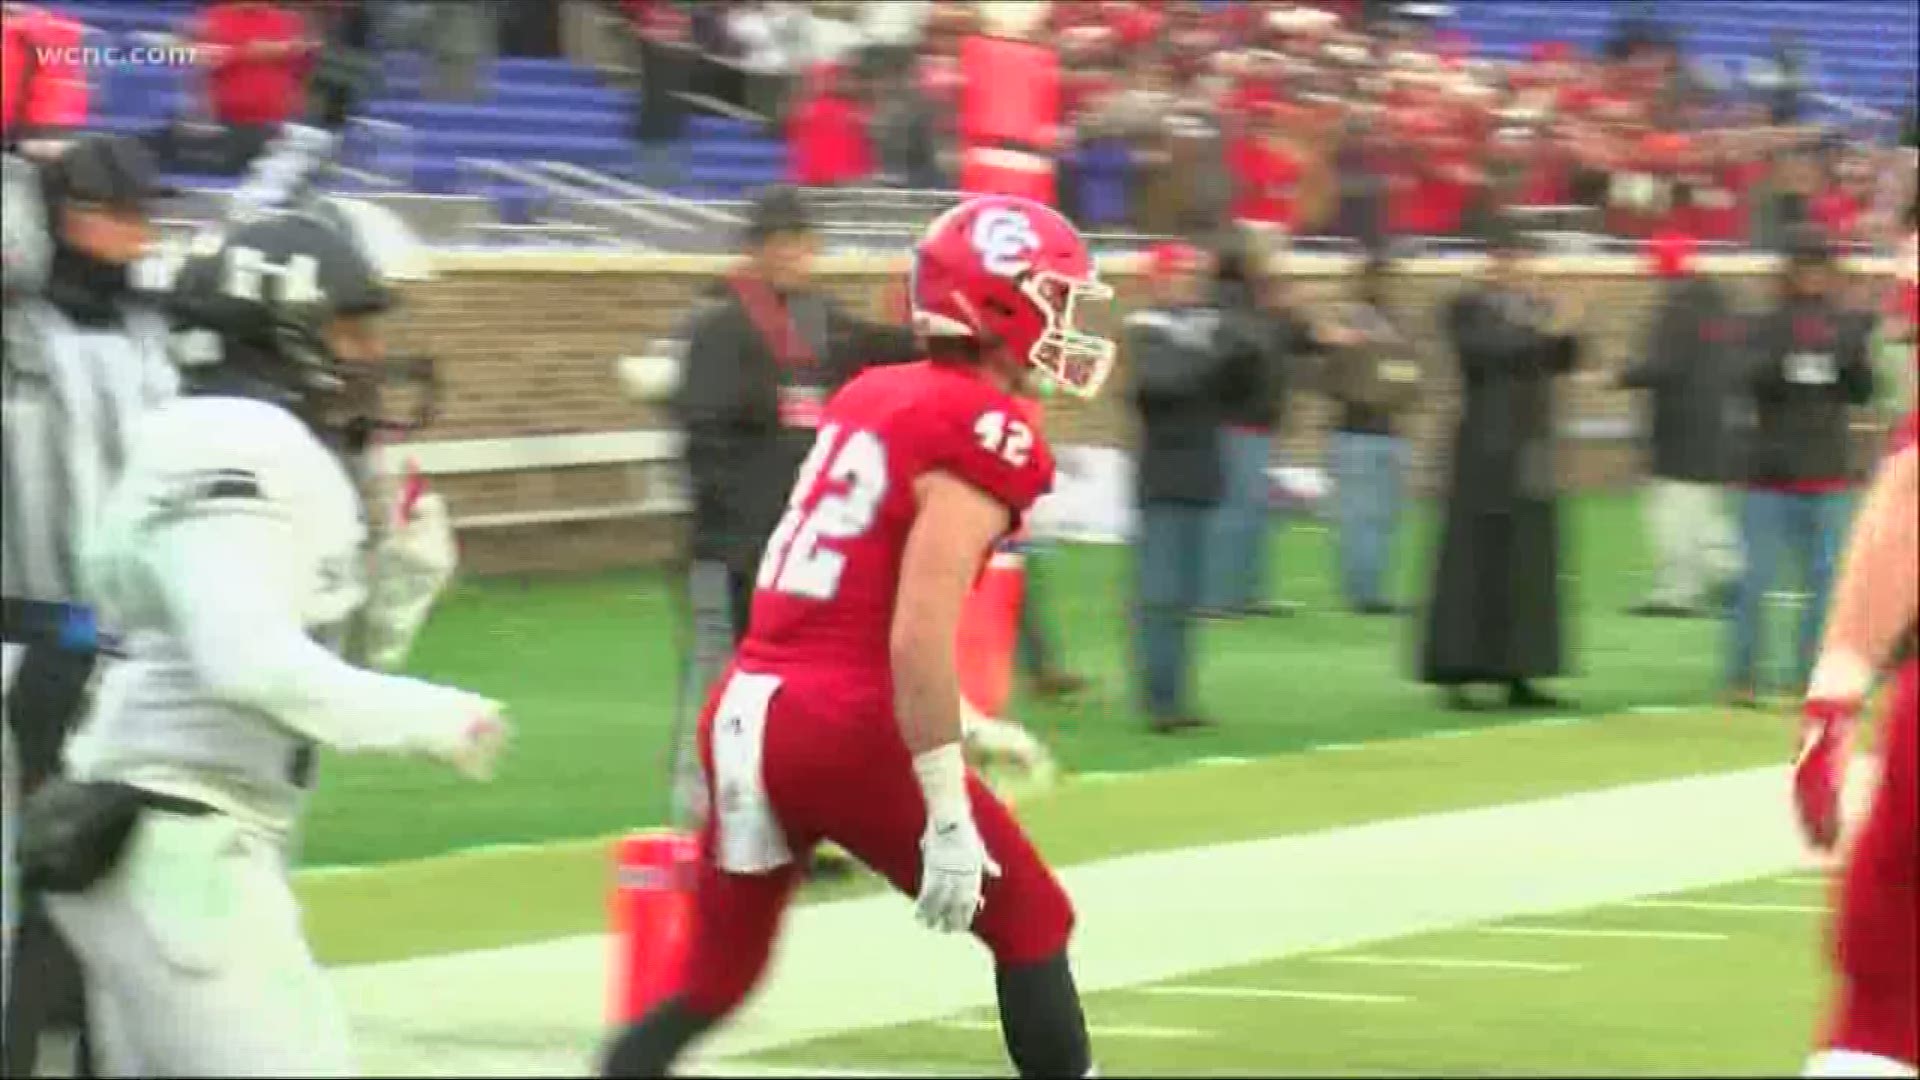 The Charlotte Catholic Cougars won the 3A state championship with a 28-14 win over Havelock Saturday.